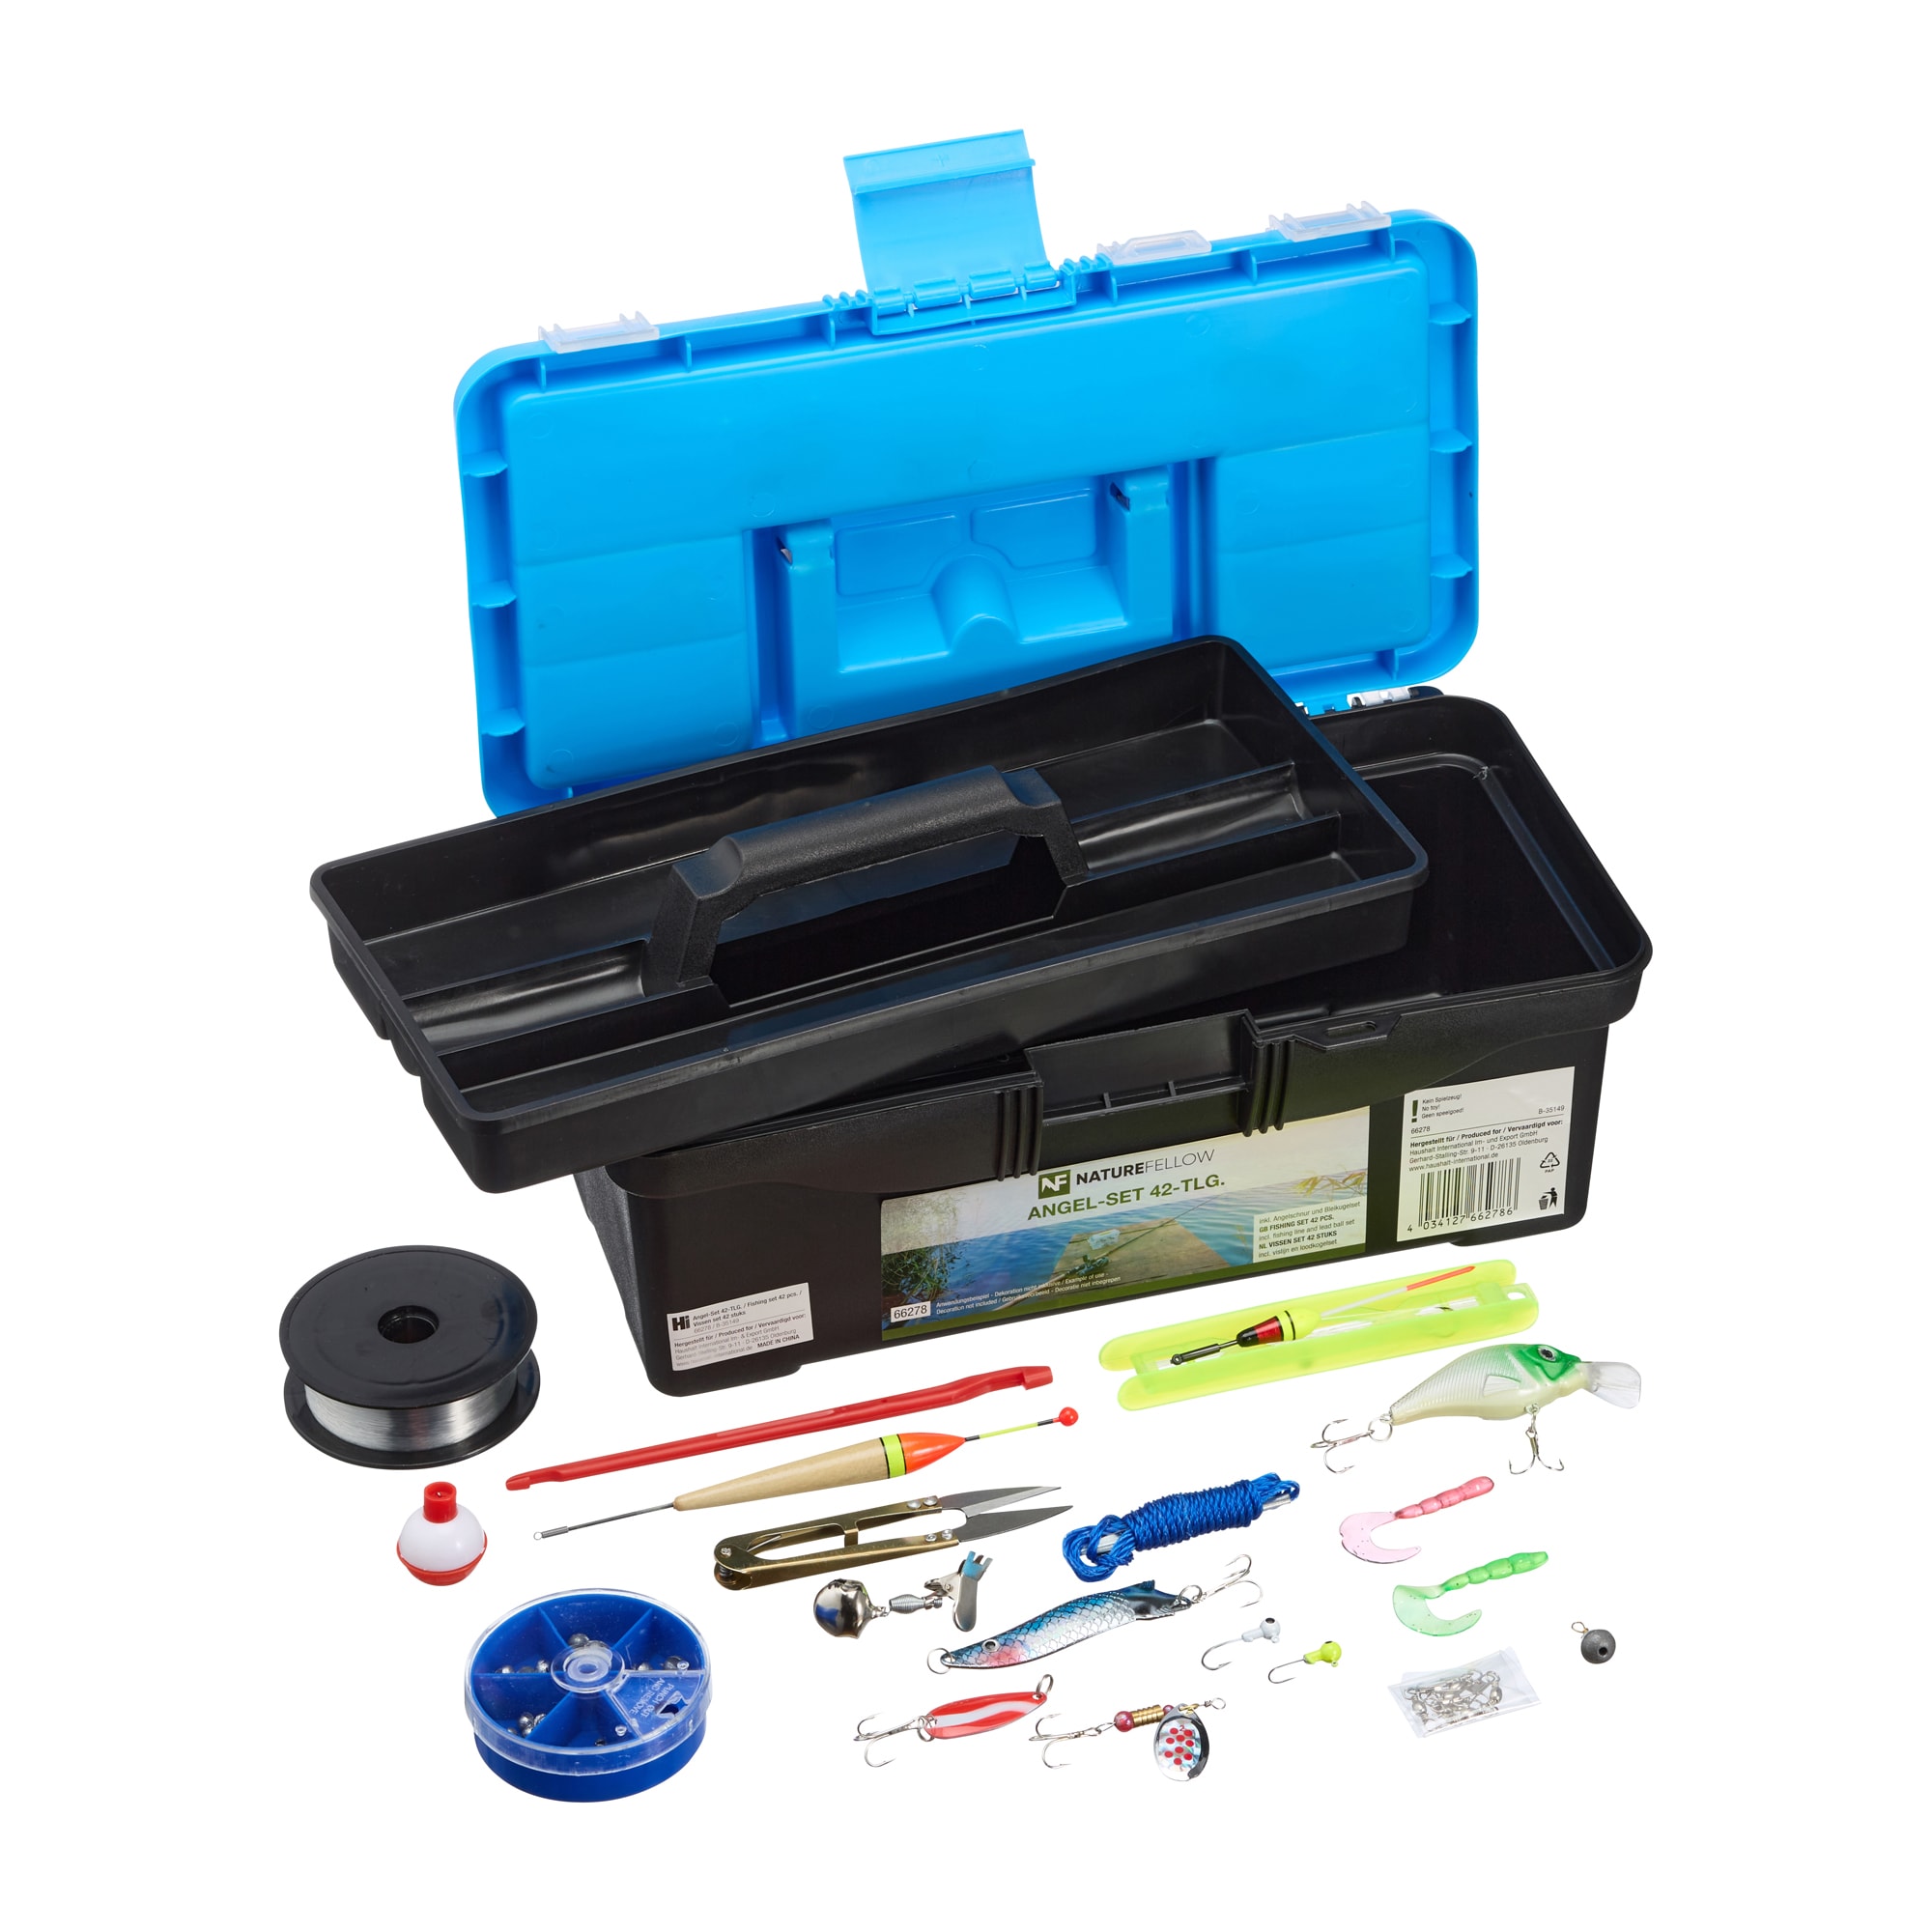 Purchase the HI Fishing Tackle Box Set 42 Pieces by ASMC